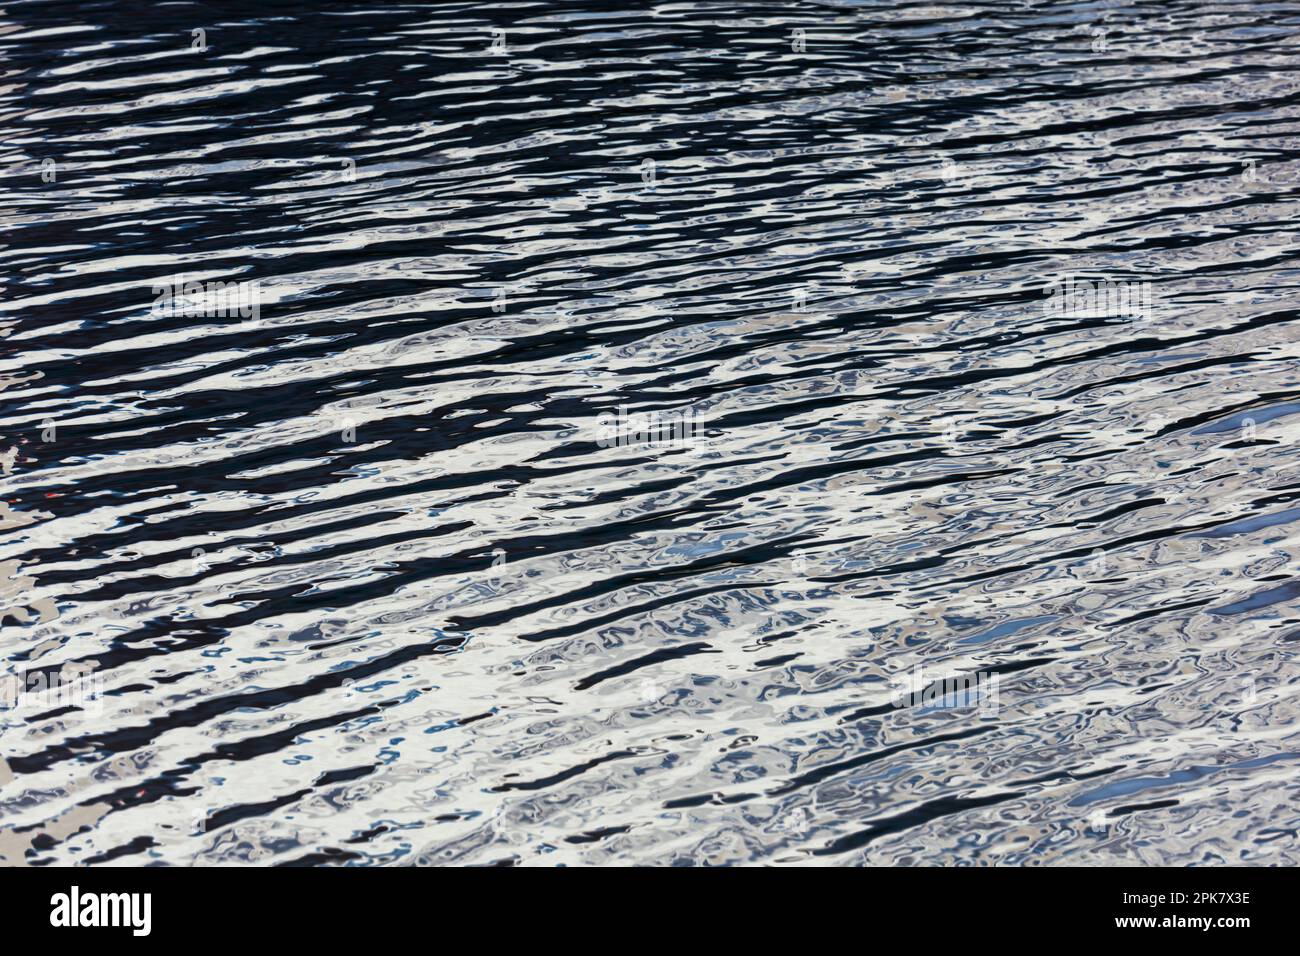 River water surface details, reflections and abstracts, ripples and patterns. Stock Photo